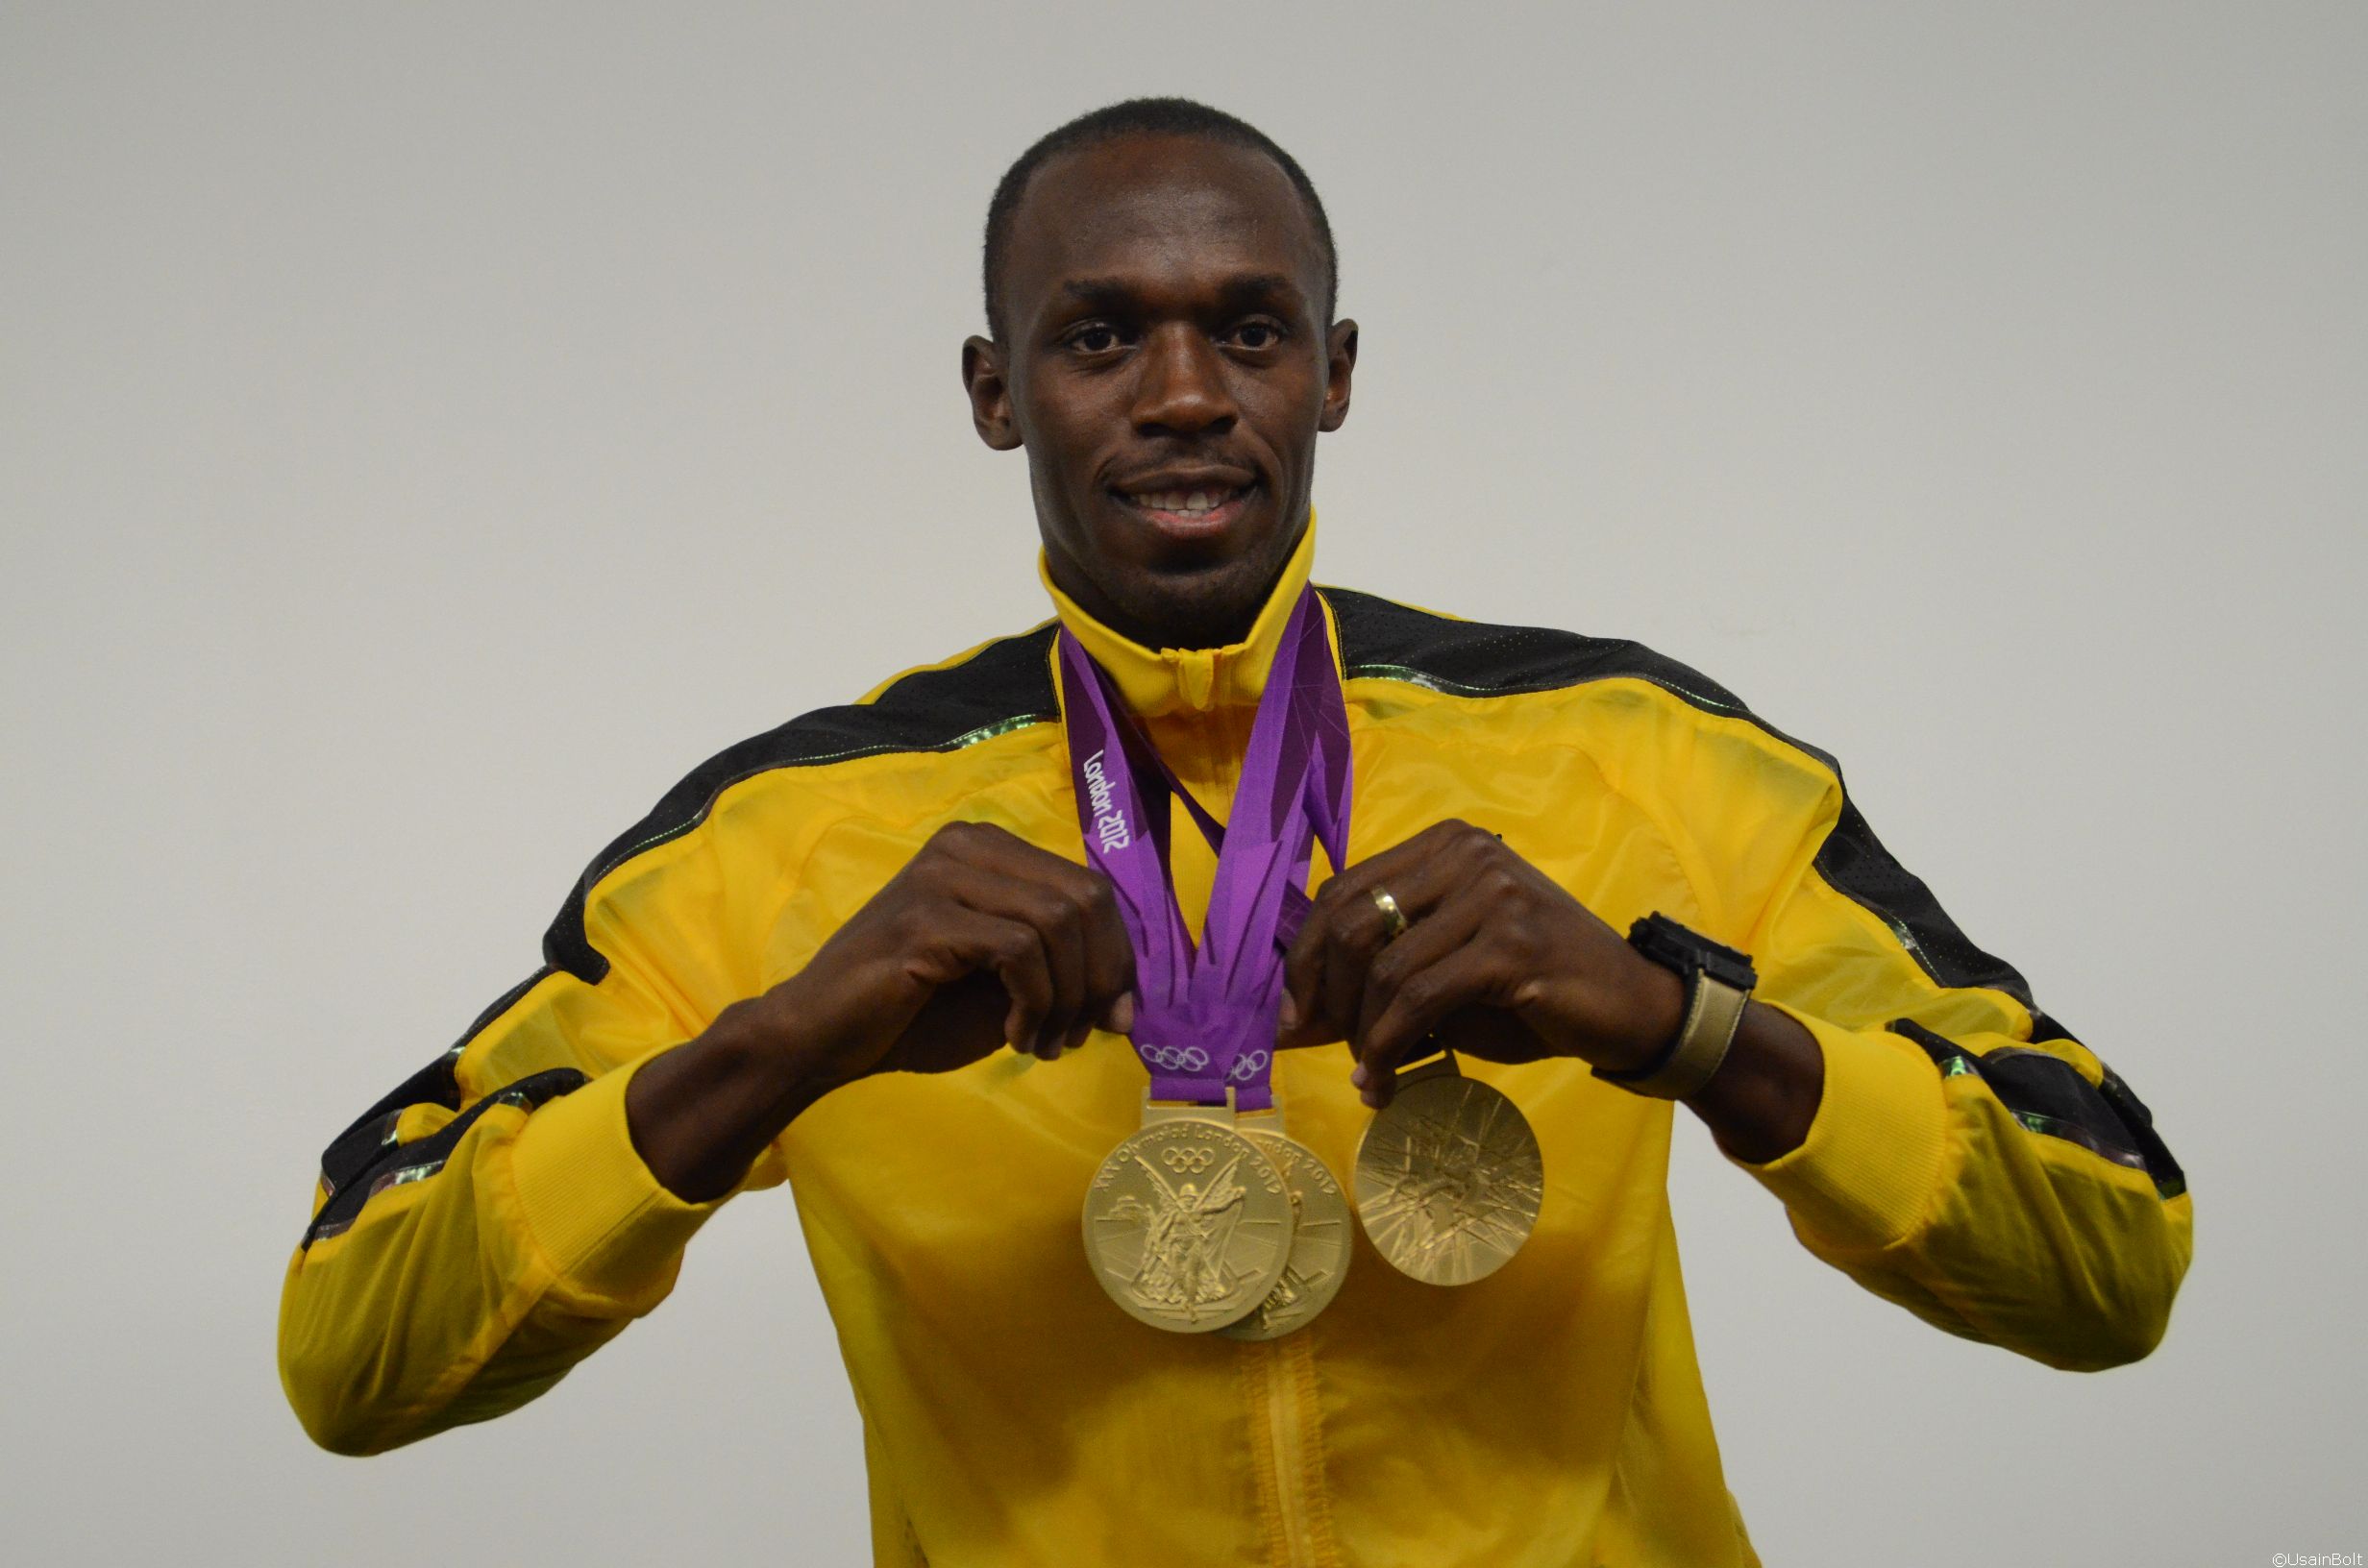 Usain is selected as the l’Equipe Sportsman of the Year